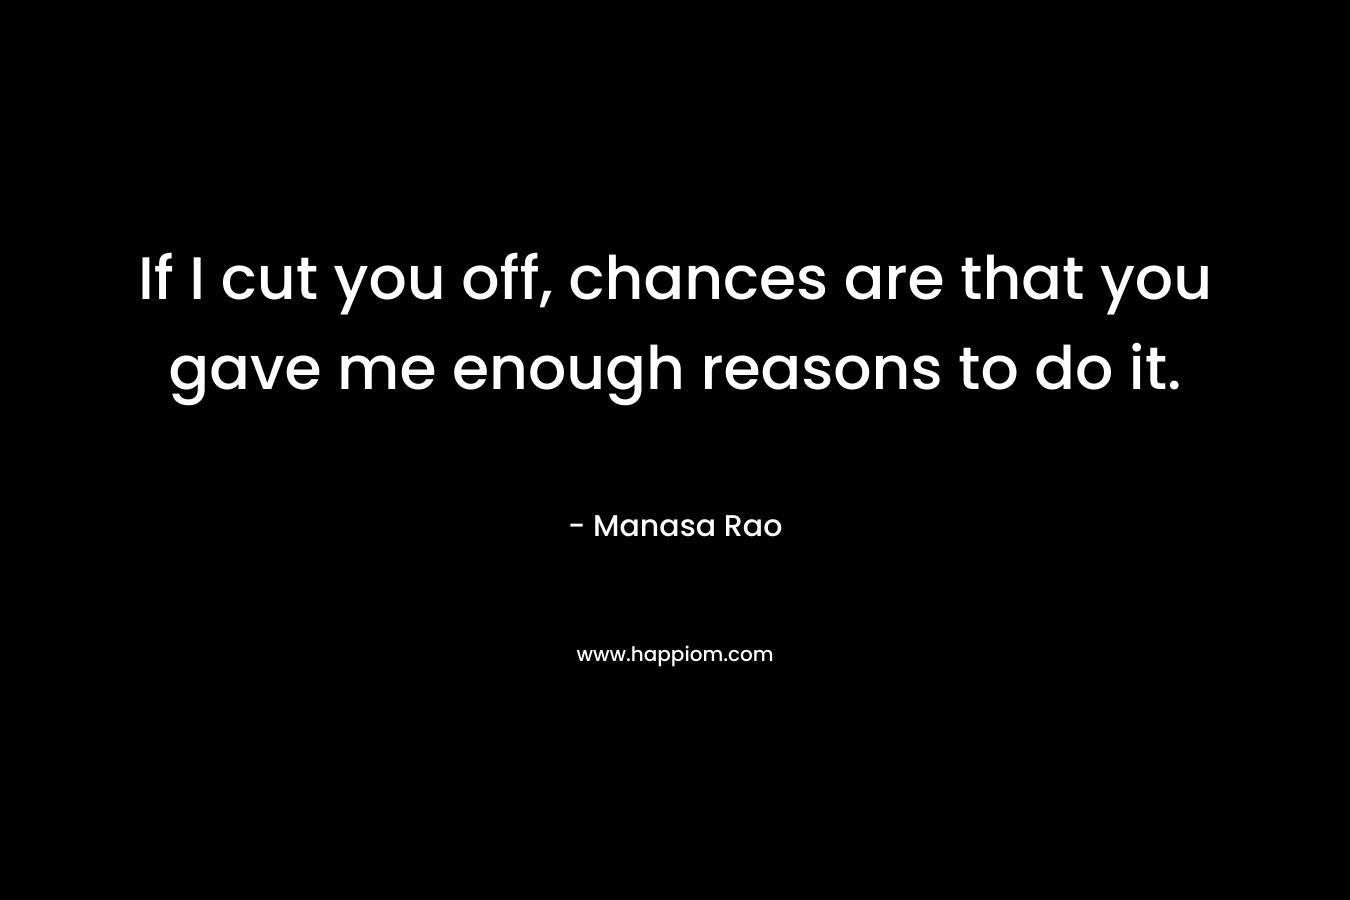 If I cut you off, chances are that you gave me enough reasons to do it. – Manasa Rao